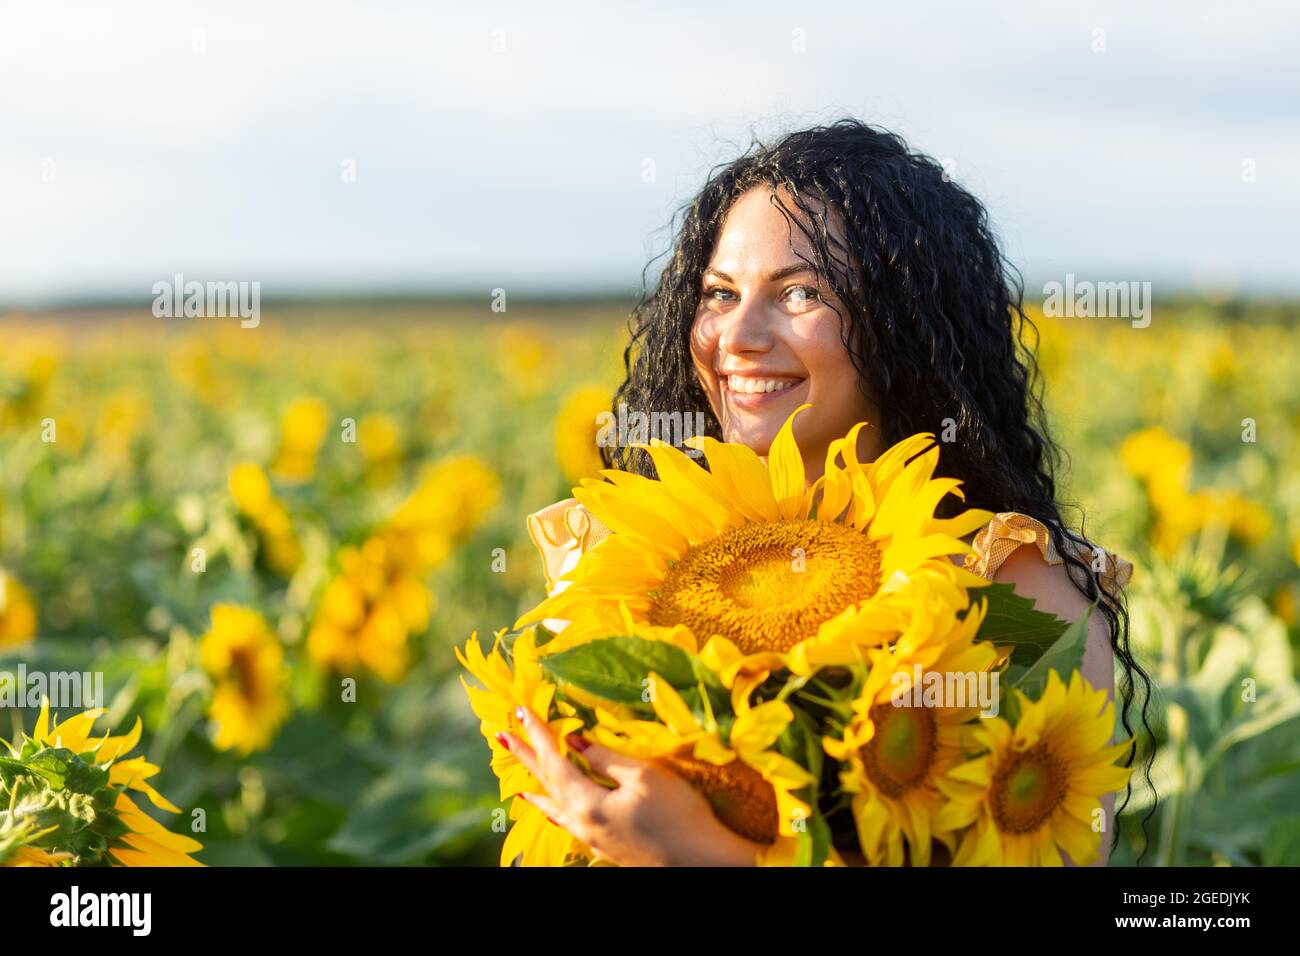 Portrait of a beautiful smiling dark-haired woman with bouquet of sunflowers Stock Photo